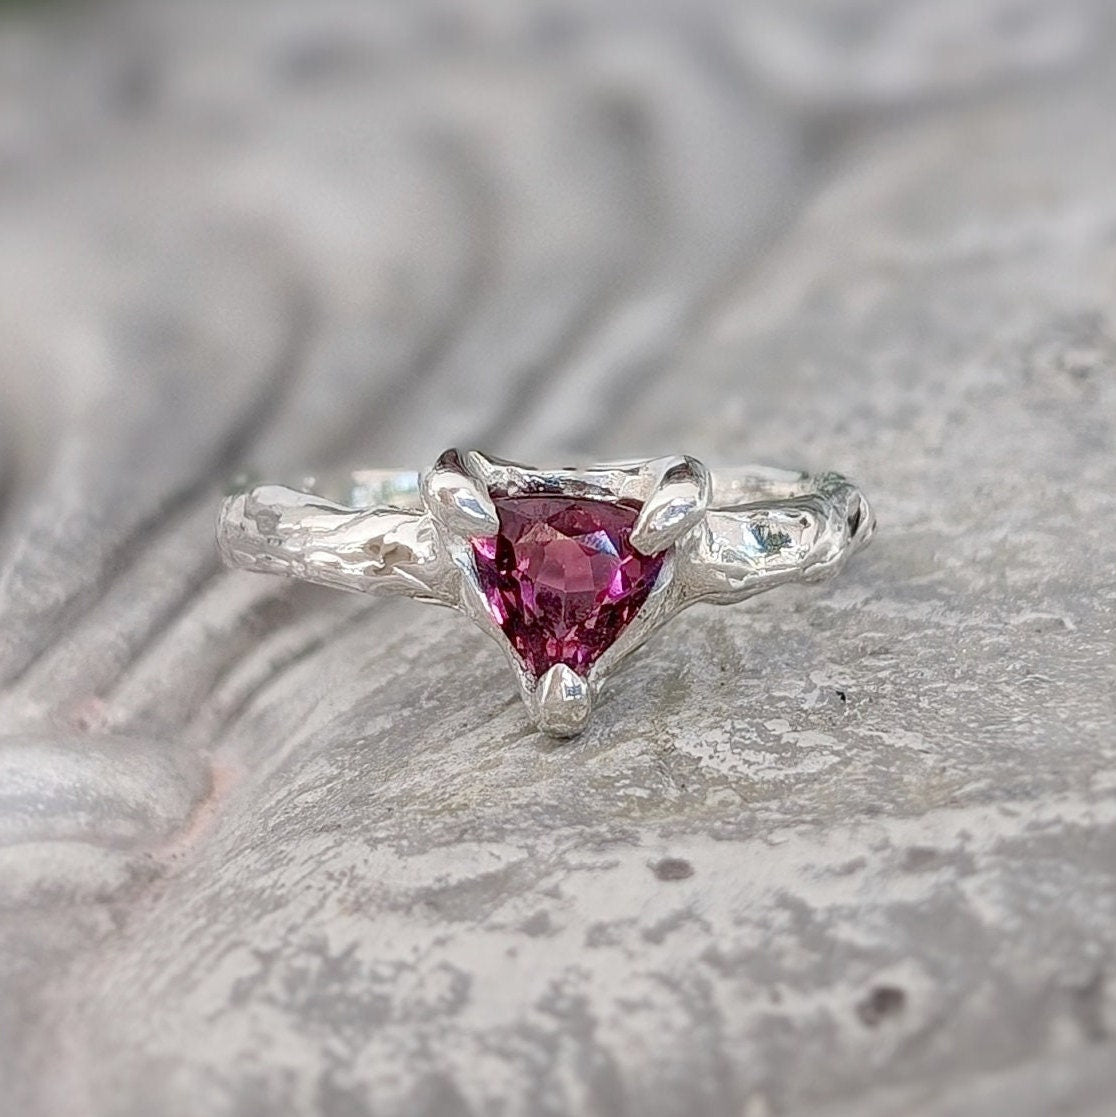 Trilliant shape Rubellite Tourmaline set by prongs on a textured Solid Sterling Silver band